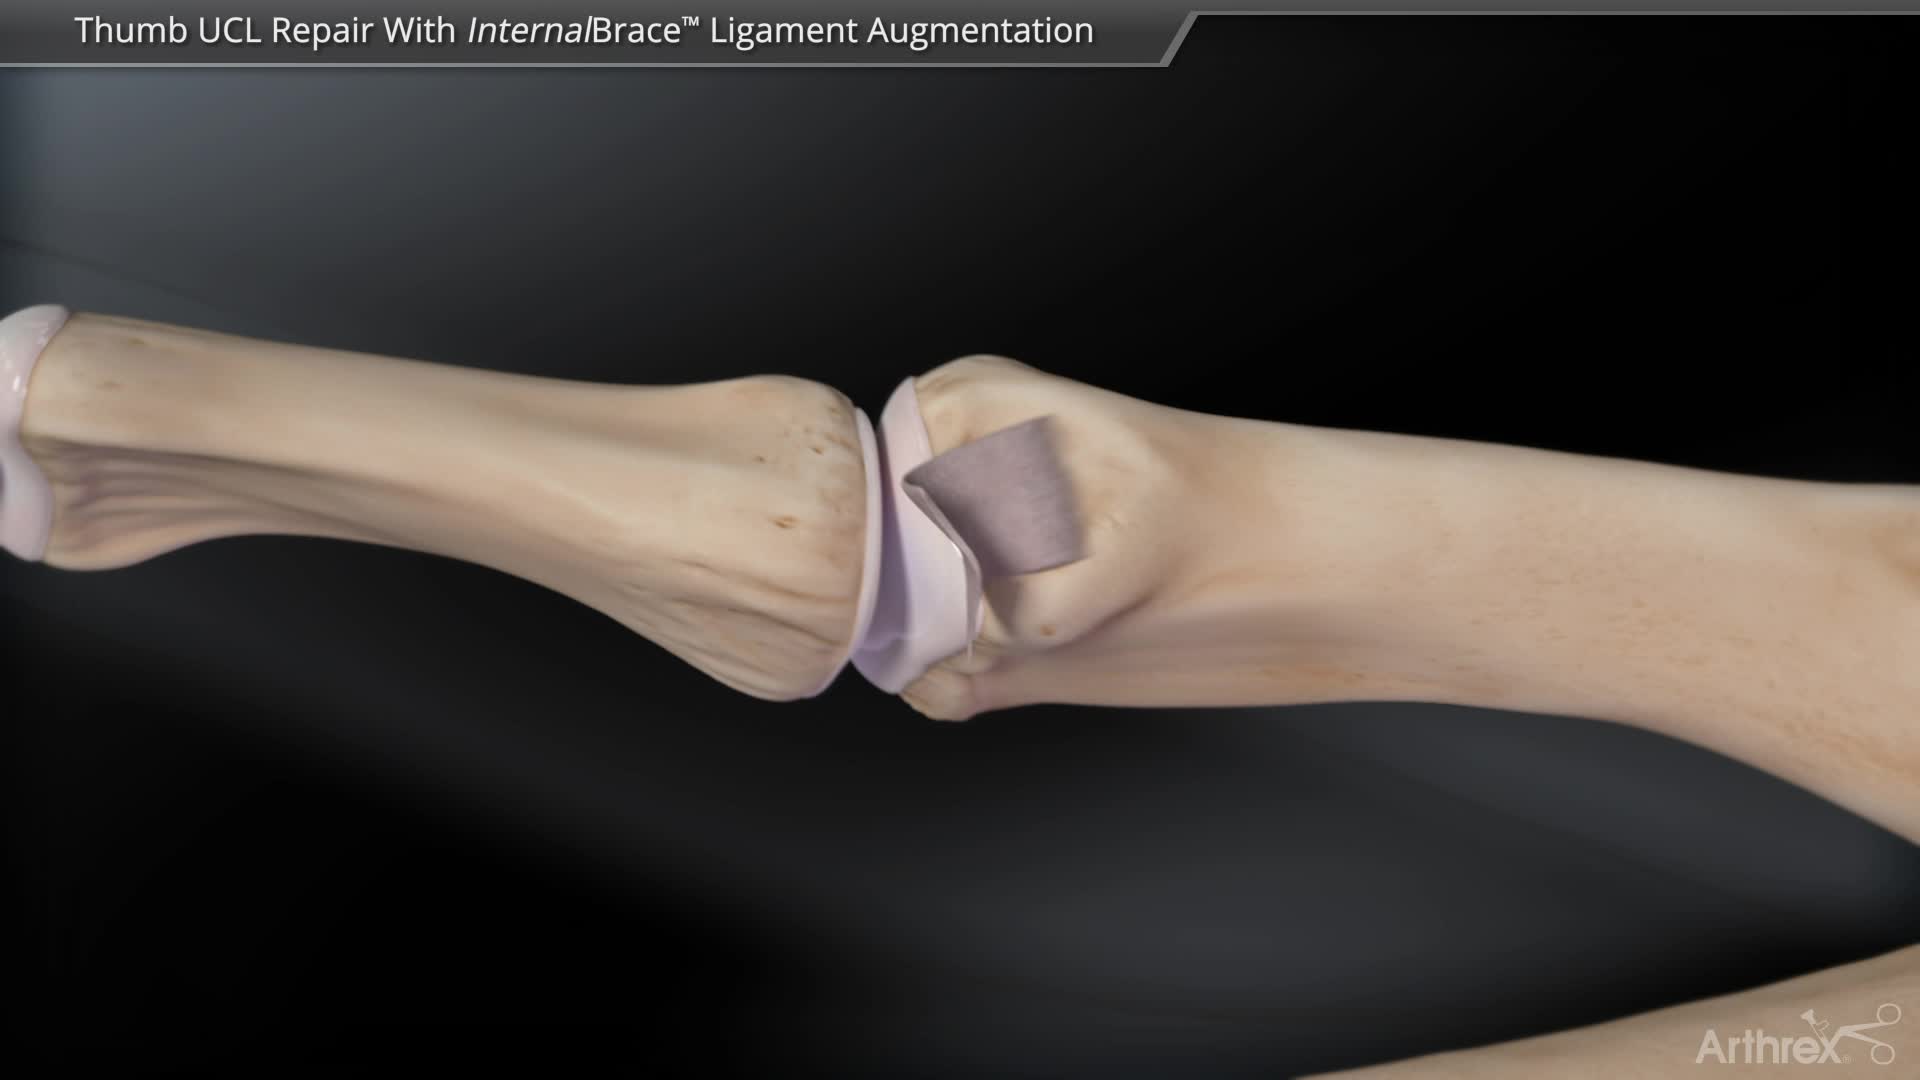 Arthrex Thumb UCL Repair And Reconstruction With InternalBrace